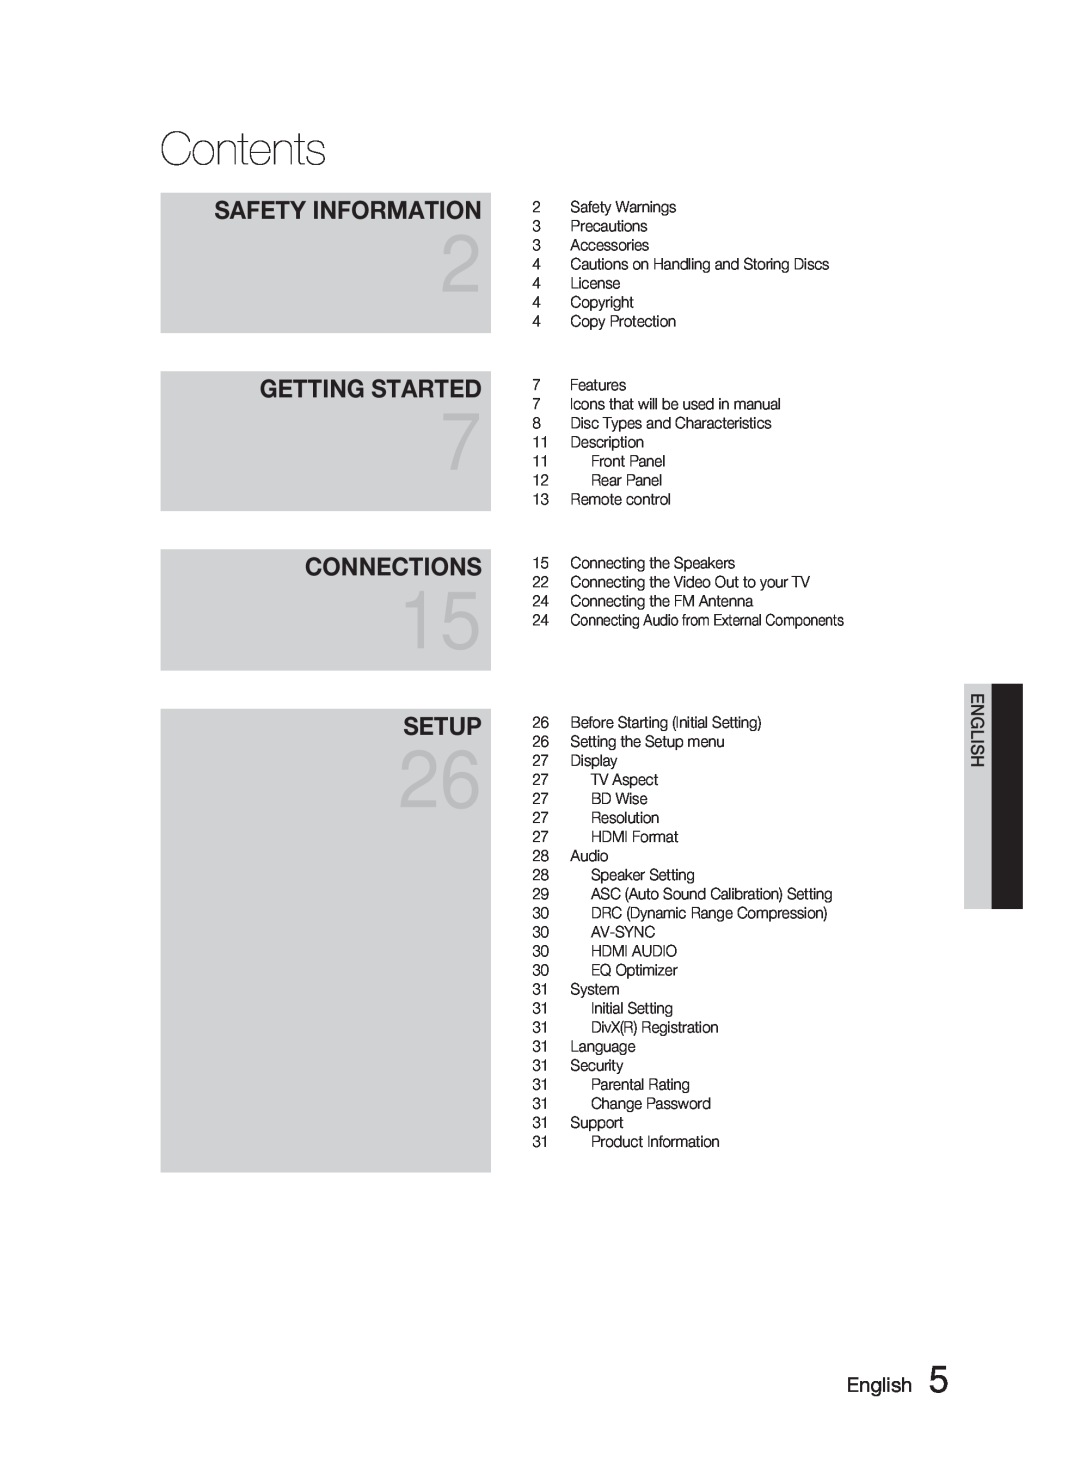 Samsung HT-C550-XAC user manual Contents, Getting Started, Connections, Setup, Safety Information, English 